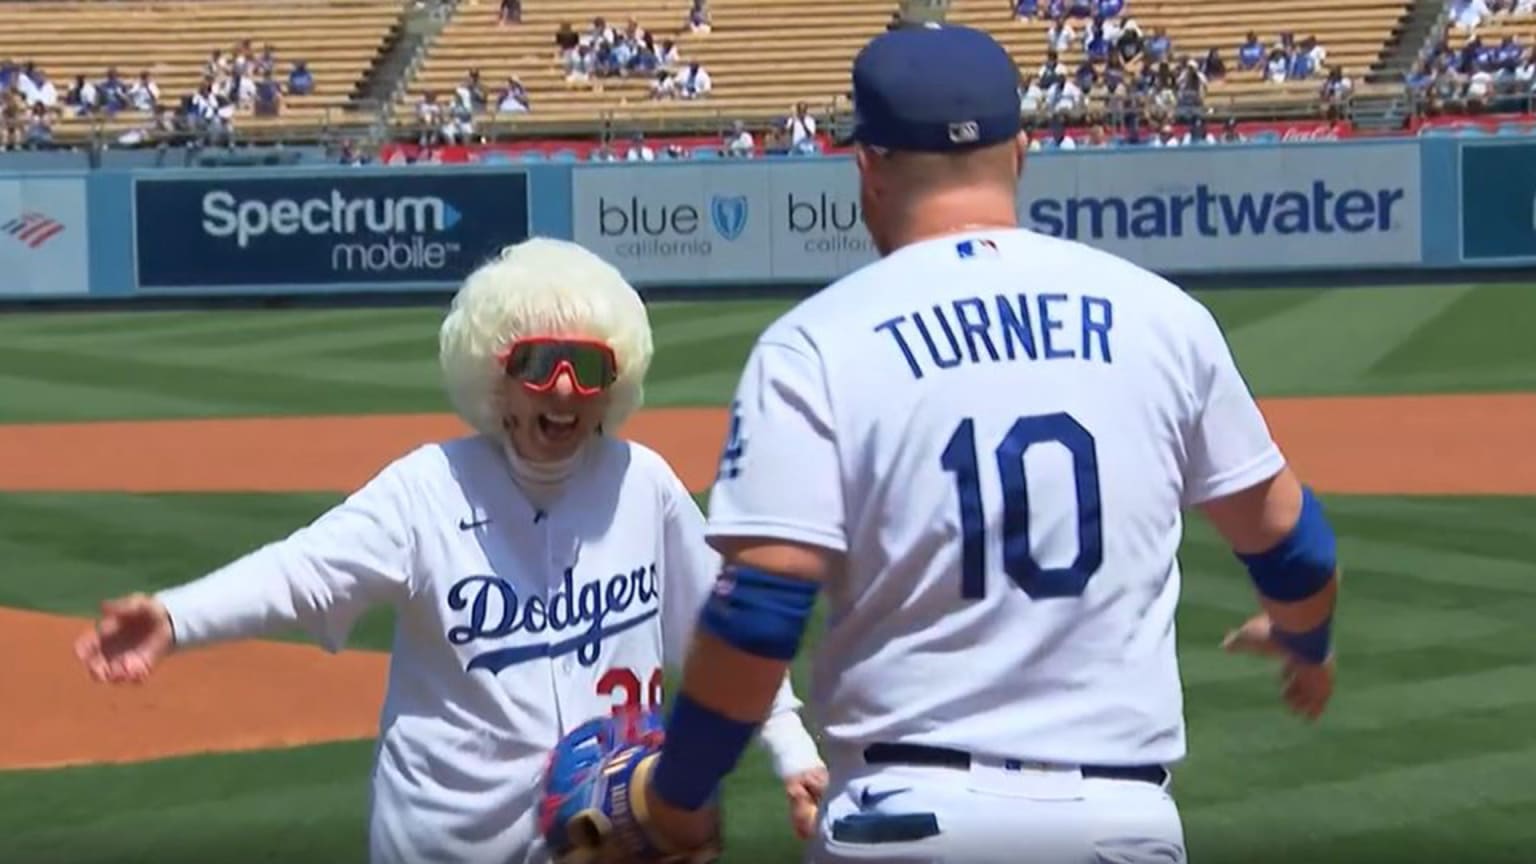 A 95-year-old woman with white hair wearing sunglasses smiles and approaches the Dodgers' Justin Turner (seen from behind) for a hug after throwing the first pitch